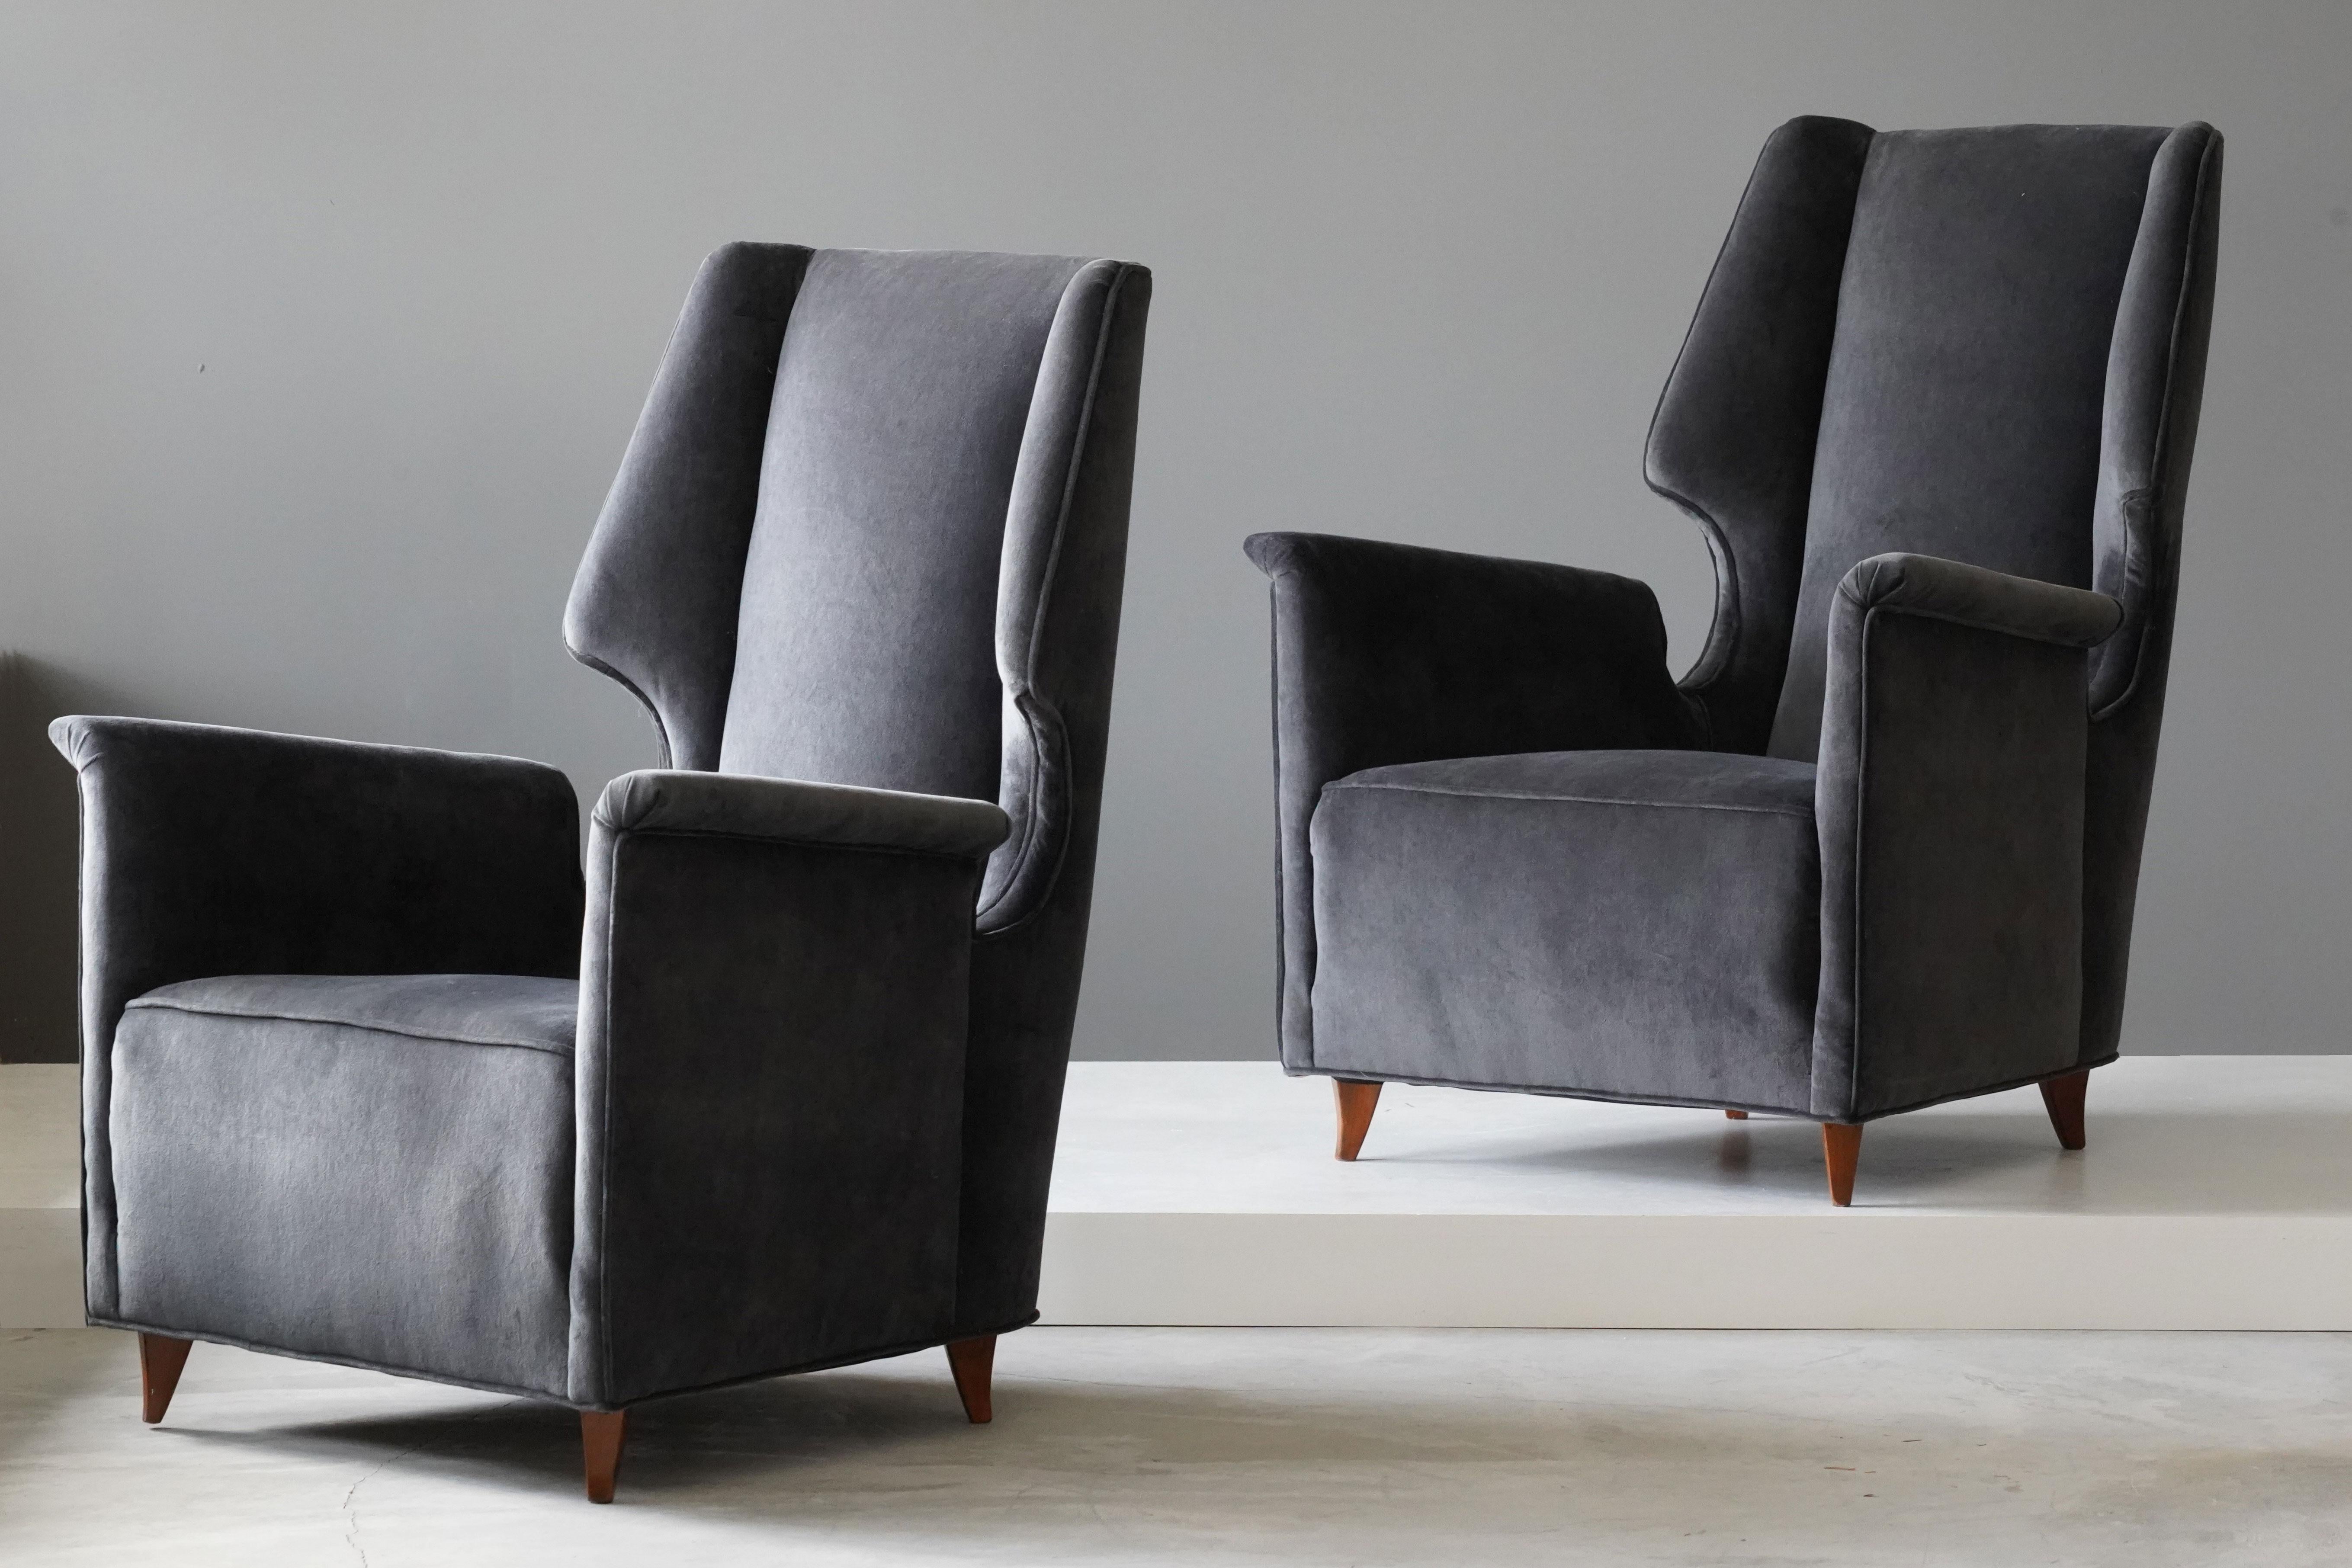 A pair of lounge chairs designed by an unknown Italian modernist designer, 1950s, Italy. Upholstered in new high-end velvet.

Other Italian designers of the period include Gio Ponti, Franco Albini, Paolo Buffa, Carlo Mollino, and Ico Parisi.